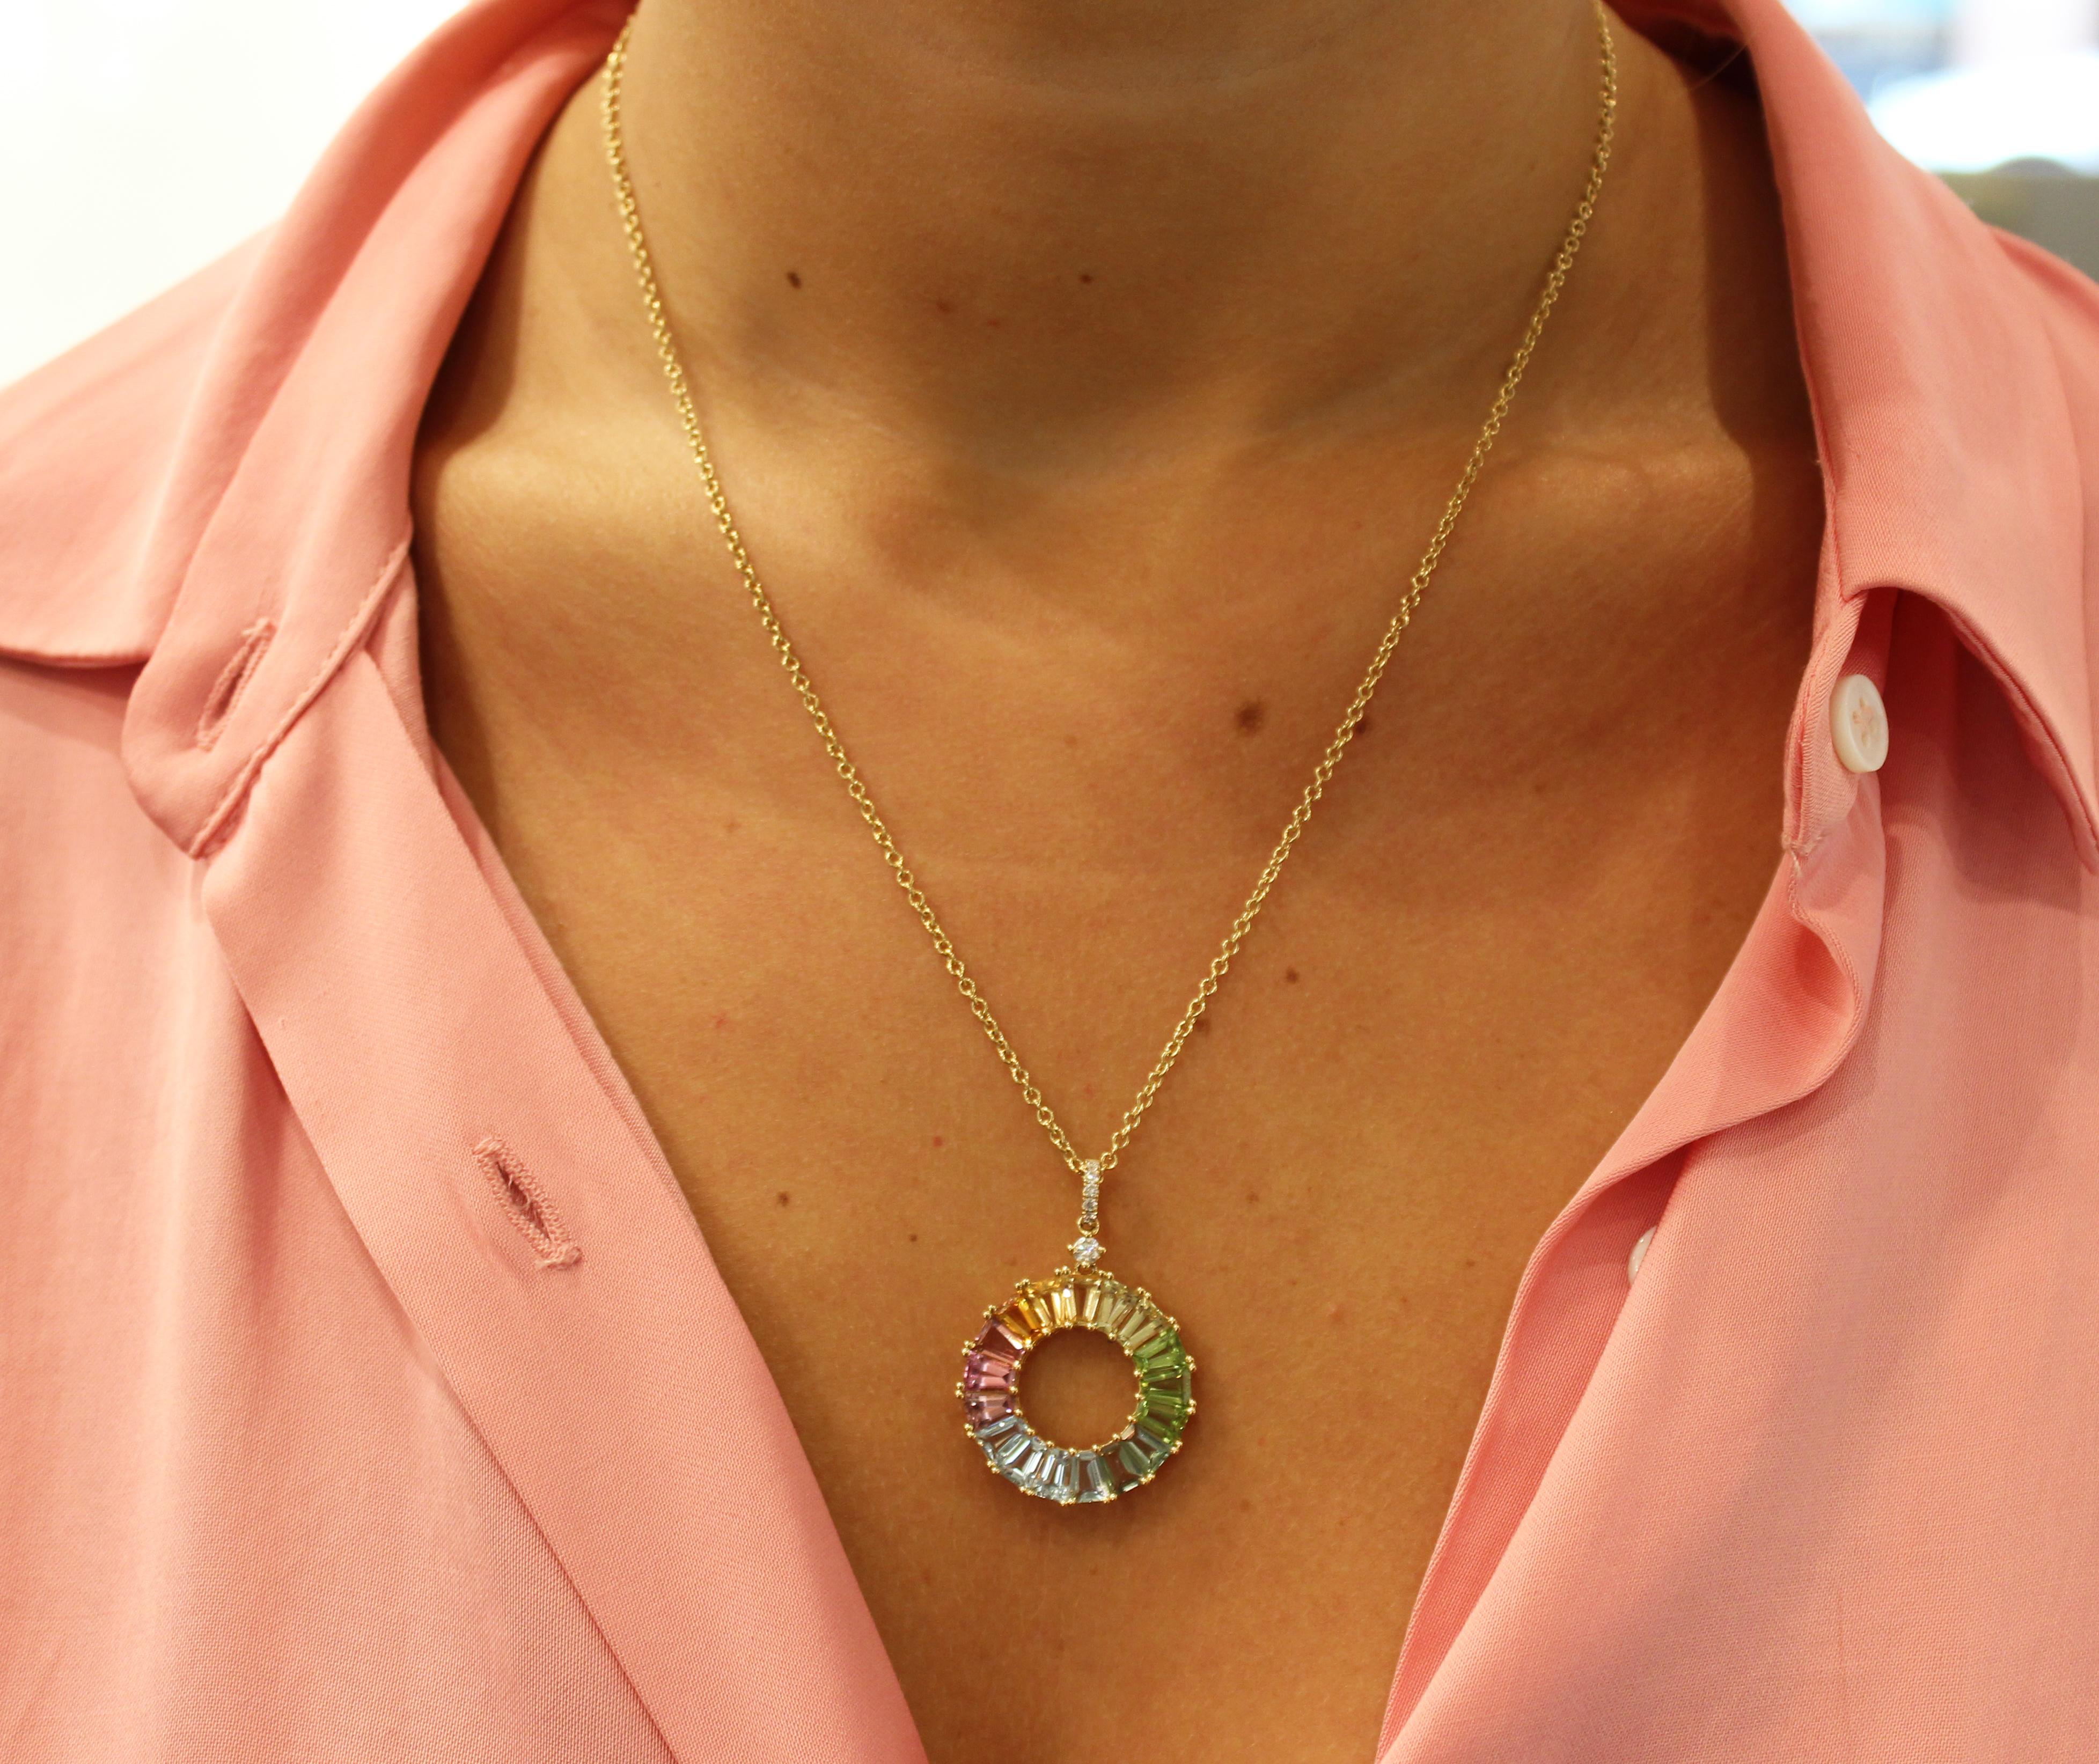 This fun and colour pendant is set in 18ct Yellow Gold and features multiple gemstones including Lemon Quartz, Blue Topaz, Citrine, Peridot, Rubellite, Pink Tourmaline and Diamonds.

If you have trouble deciding which gemstone is your favourite,